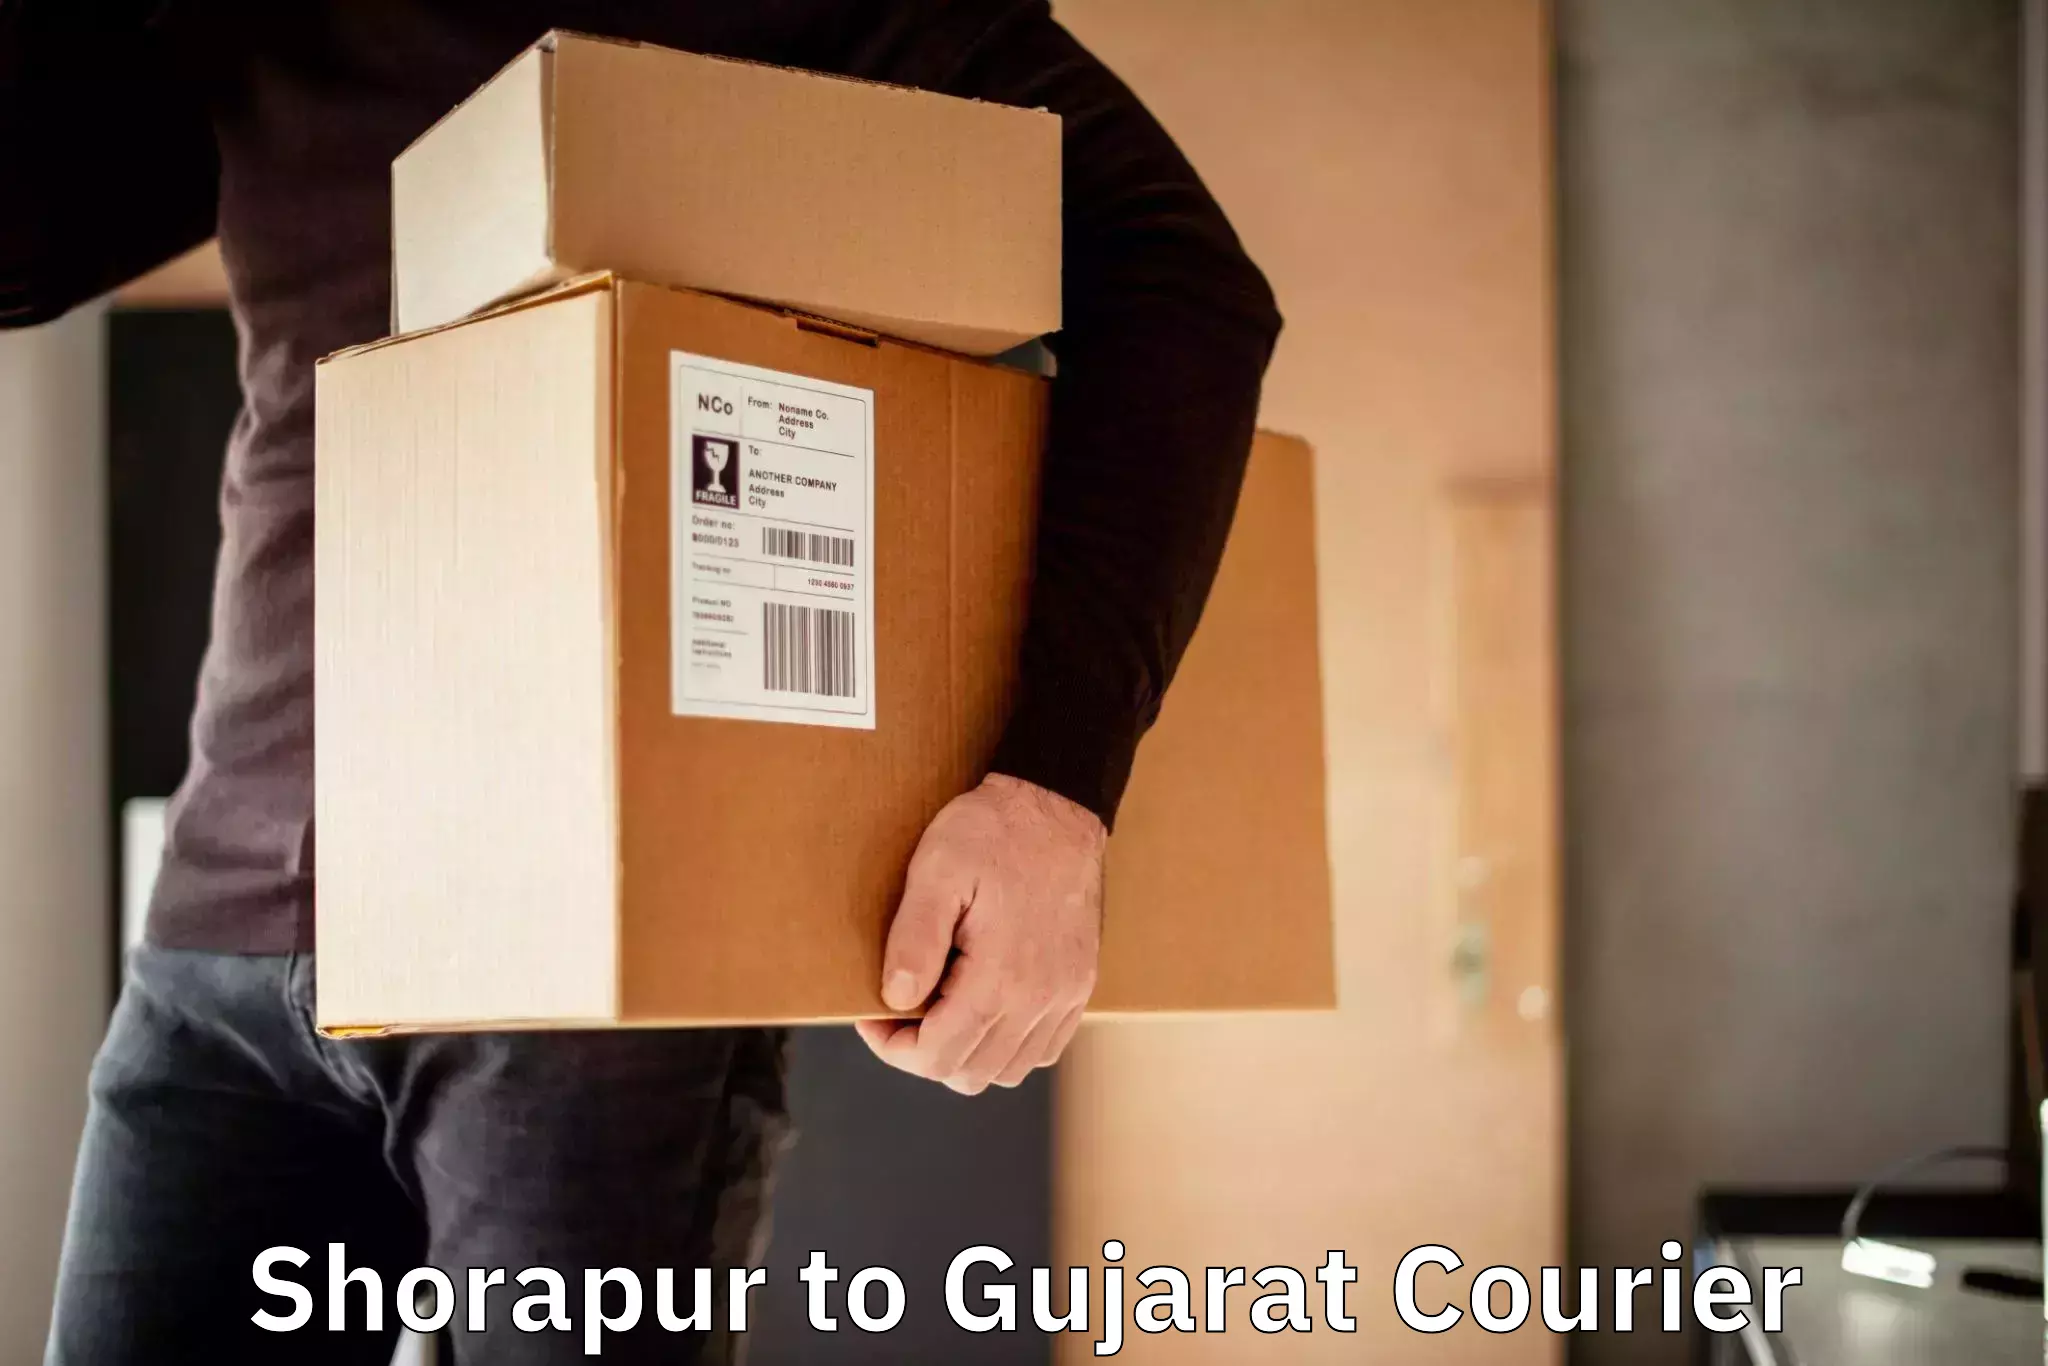 Global courier networks Shorapur to Ambaji